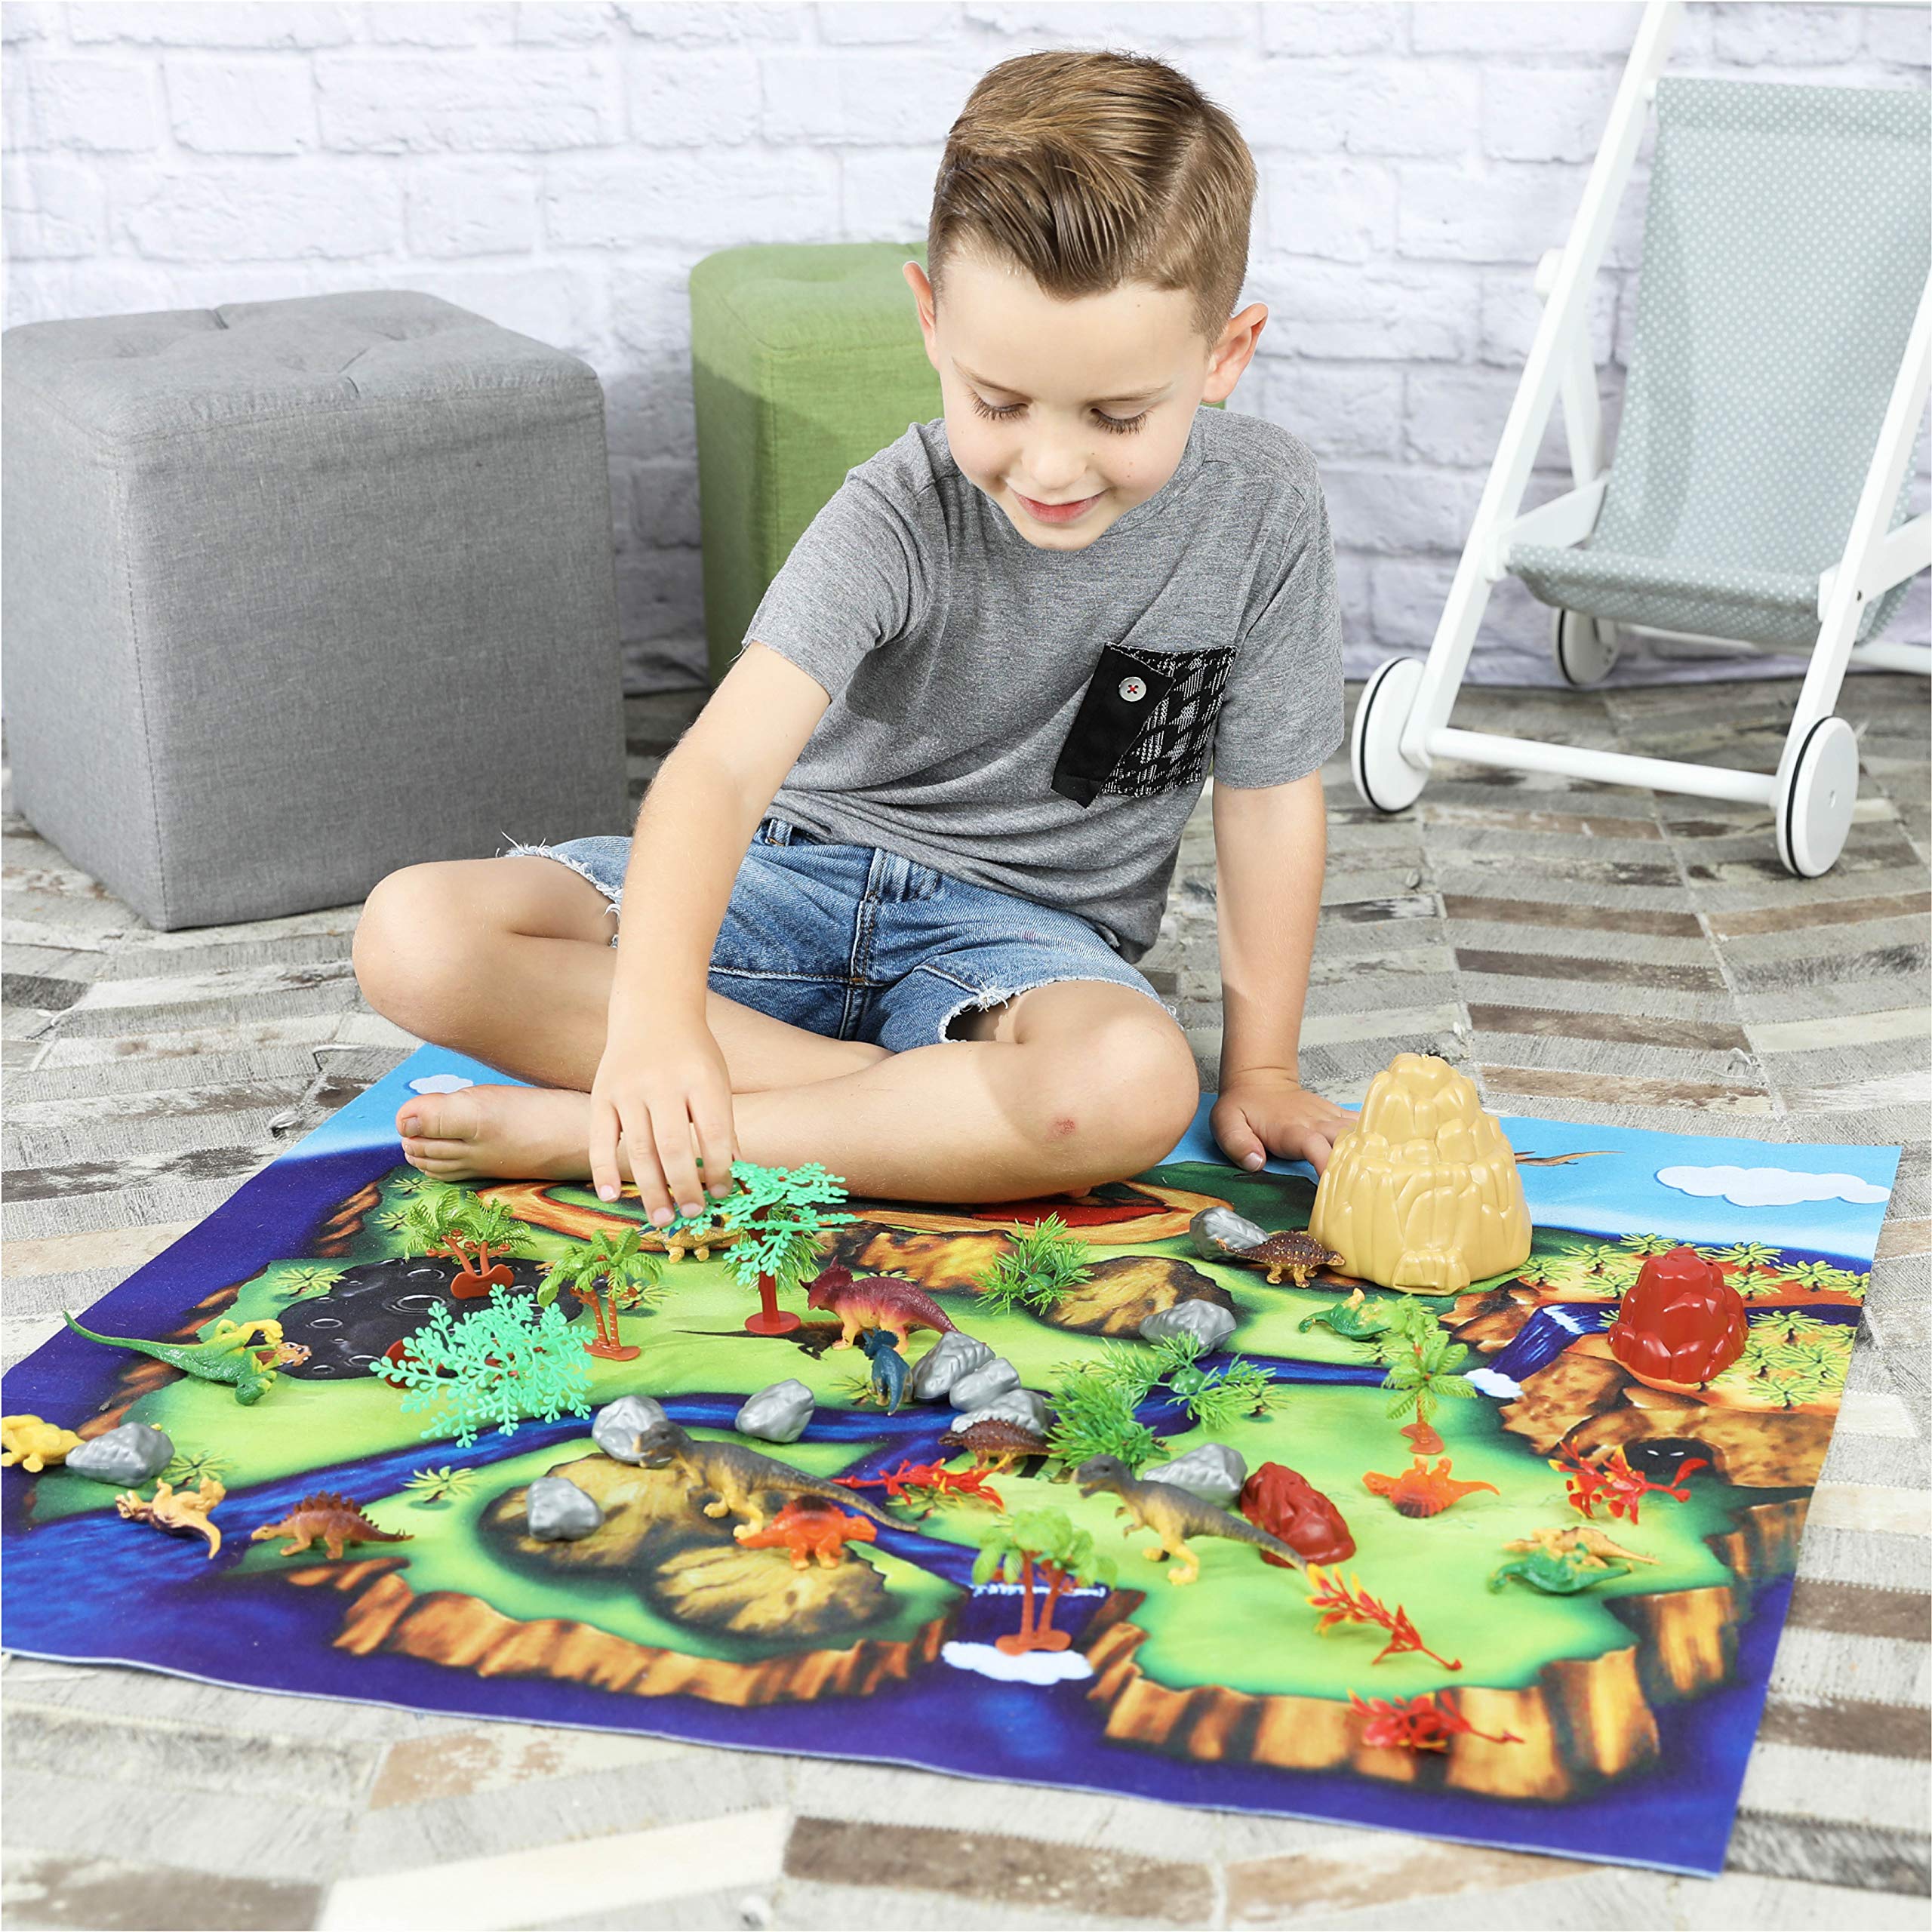 Toyvelt Dinosaur Play Set Dinosaur Toys Includes 20 Realistic Dinosaurs, 29 Trees & Rocks, PlayMat, and Beautiful Container to Create a Dino World Great Gift for Boys & Girls Ages 3,4,5,6, and Up